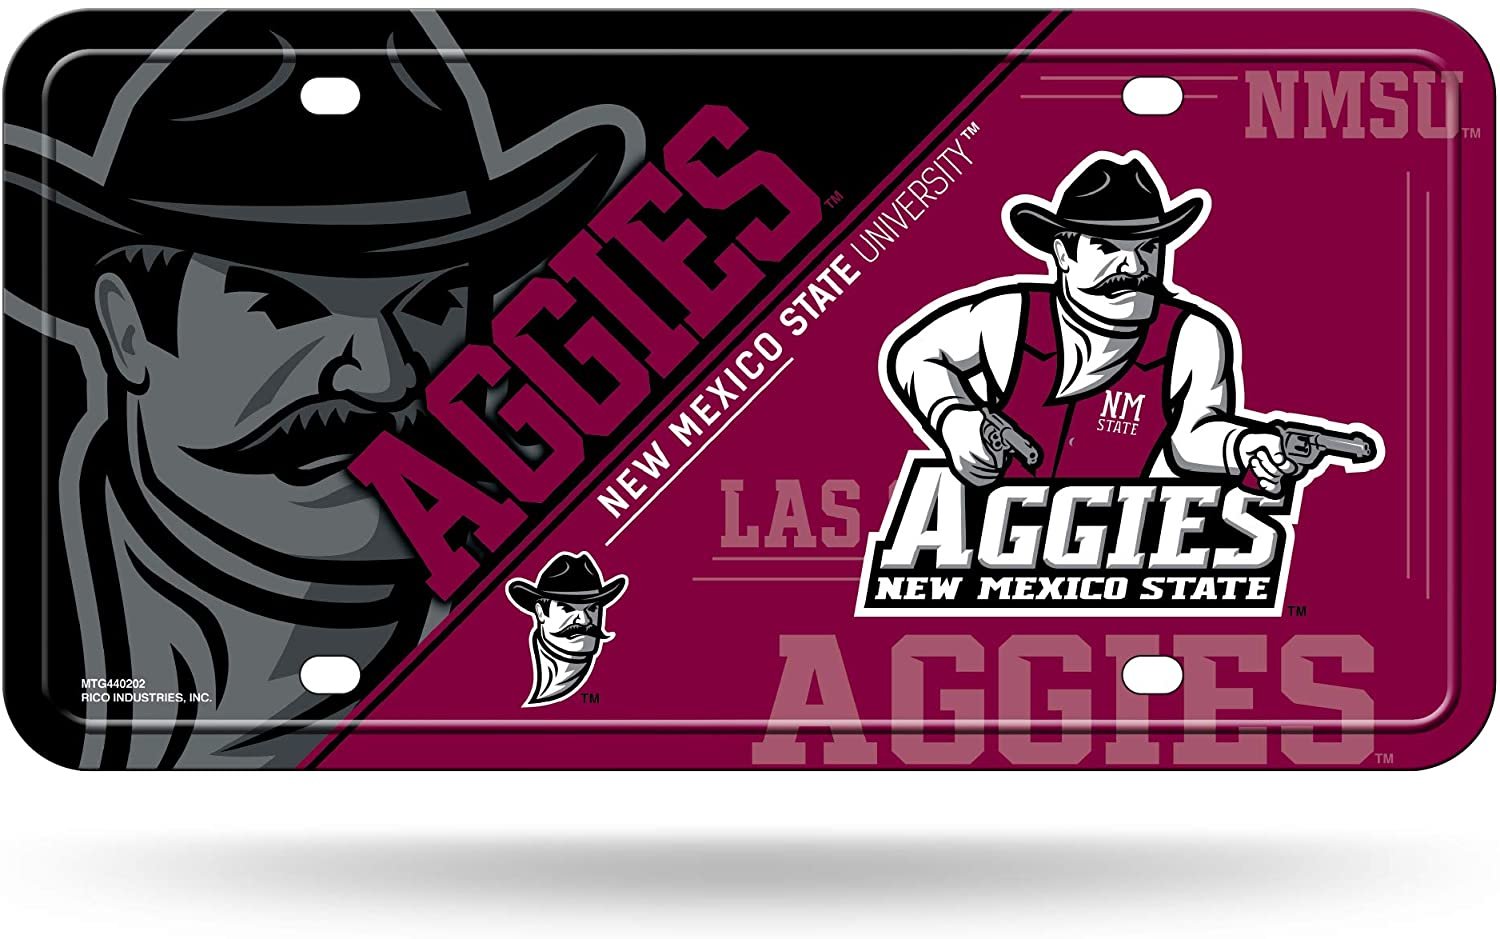 New Mexico State University Aggies Metal Tag License Plate 12x6 Inch Split Design